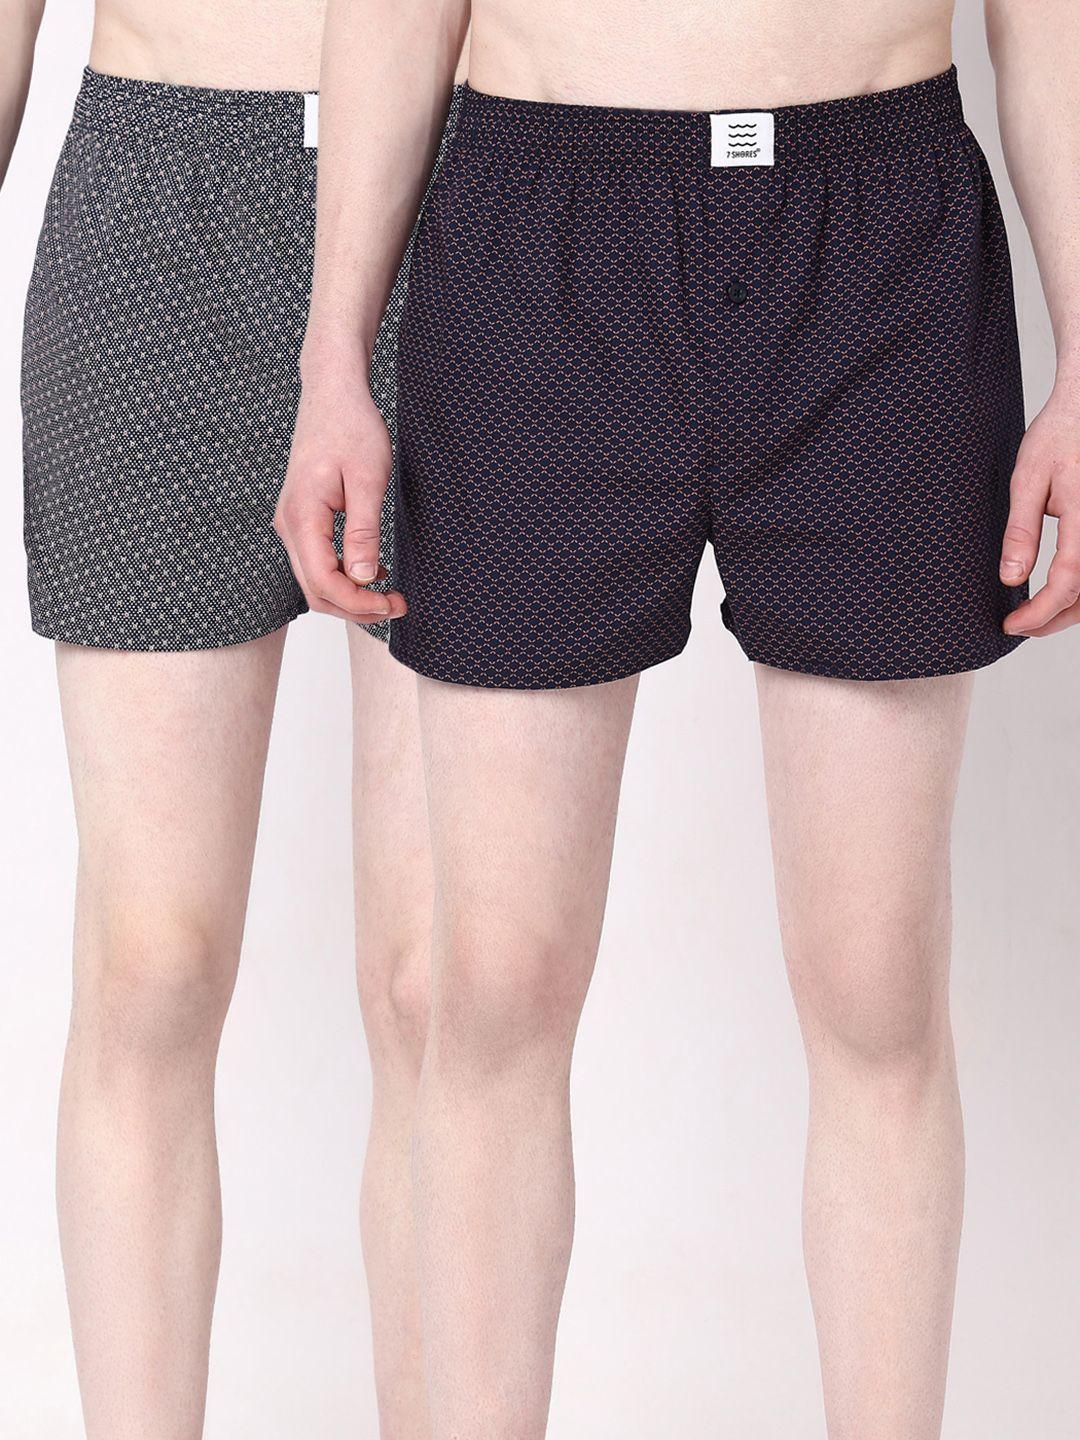 7shores-pack-of-2-printed-cotton-boxers-bst-010